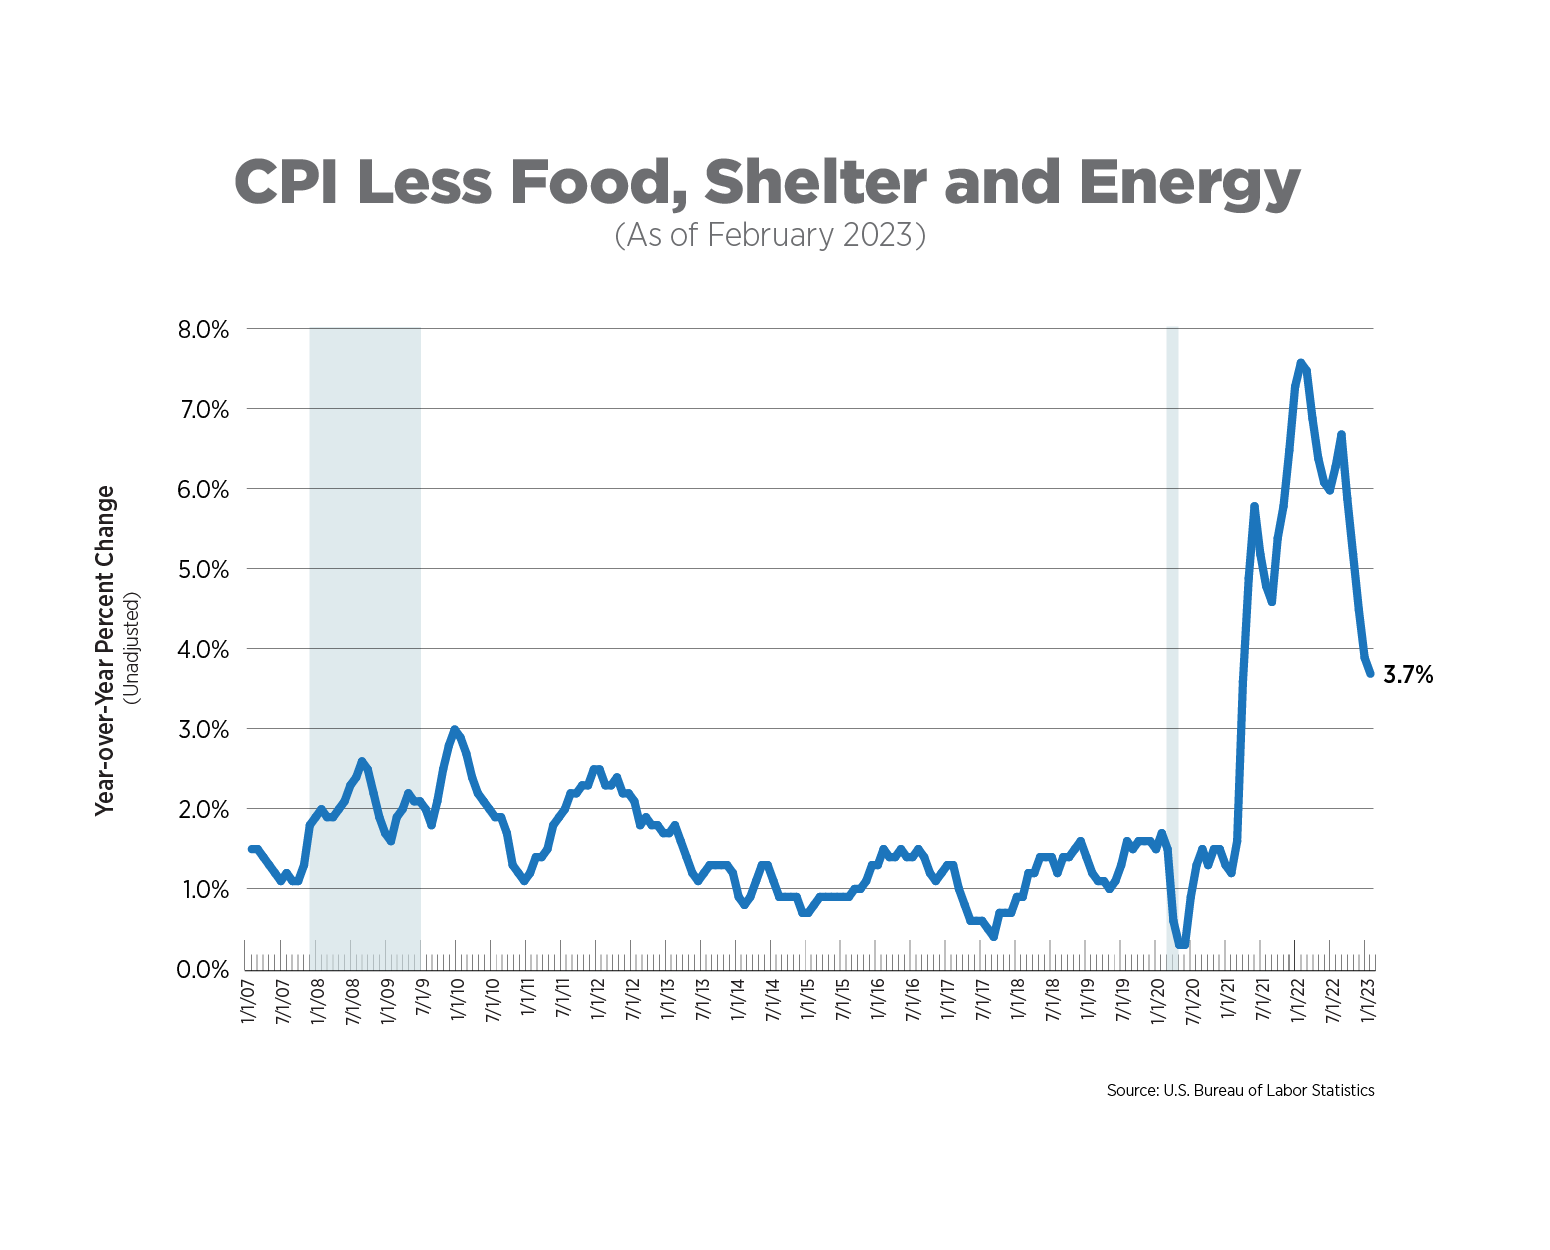 cpi less food, shelter, and energy as of february 2023